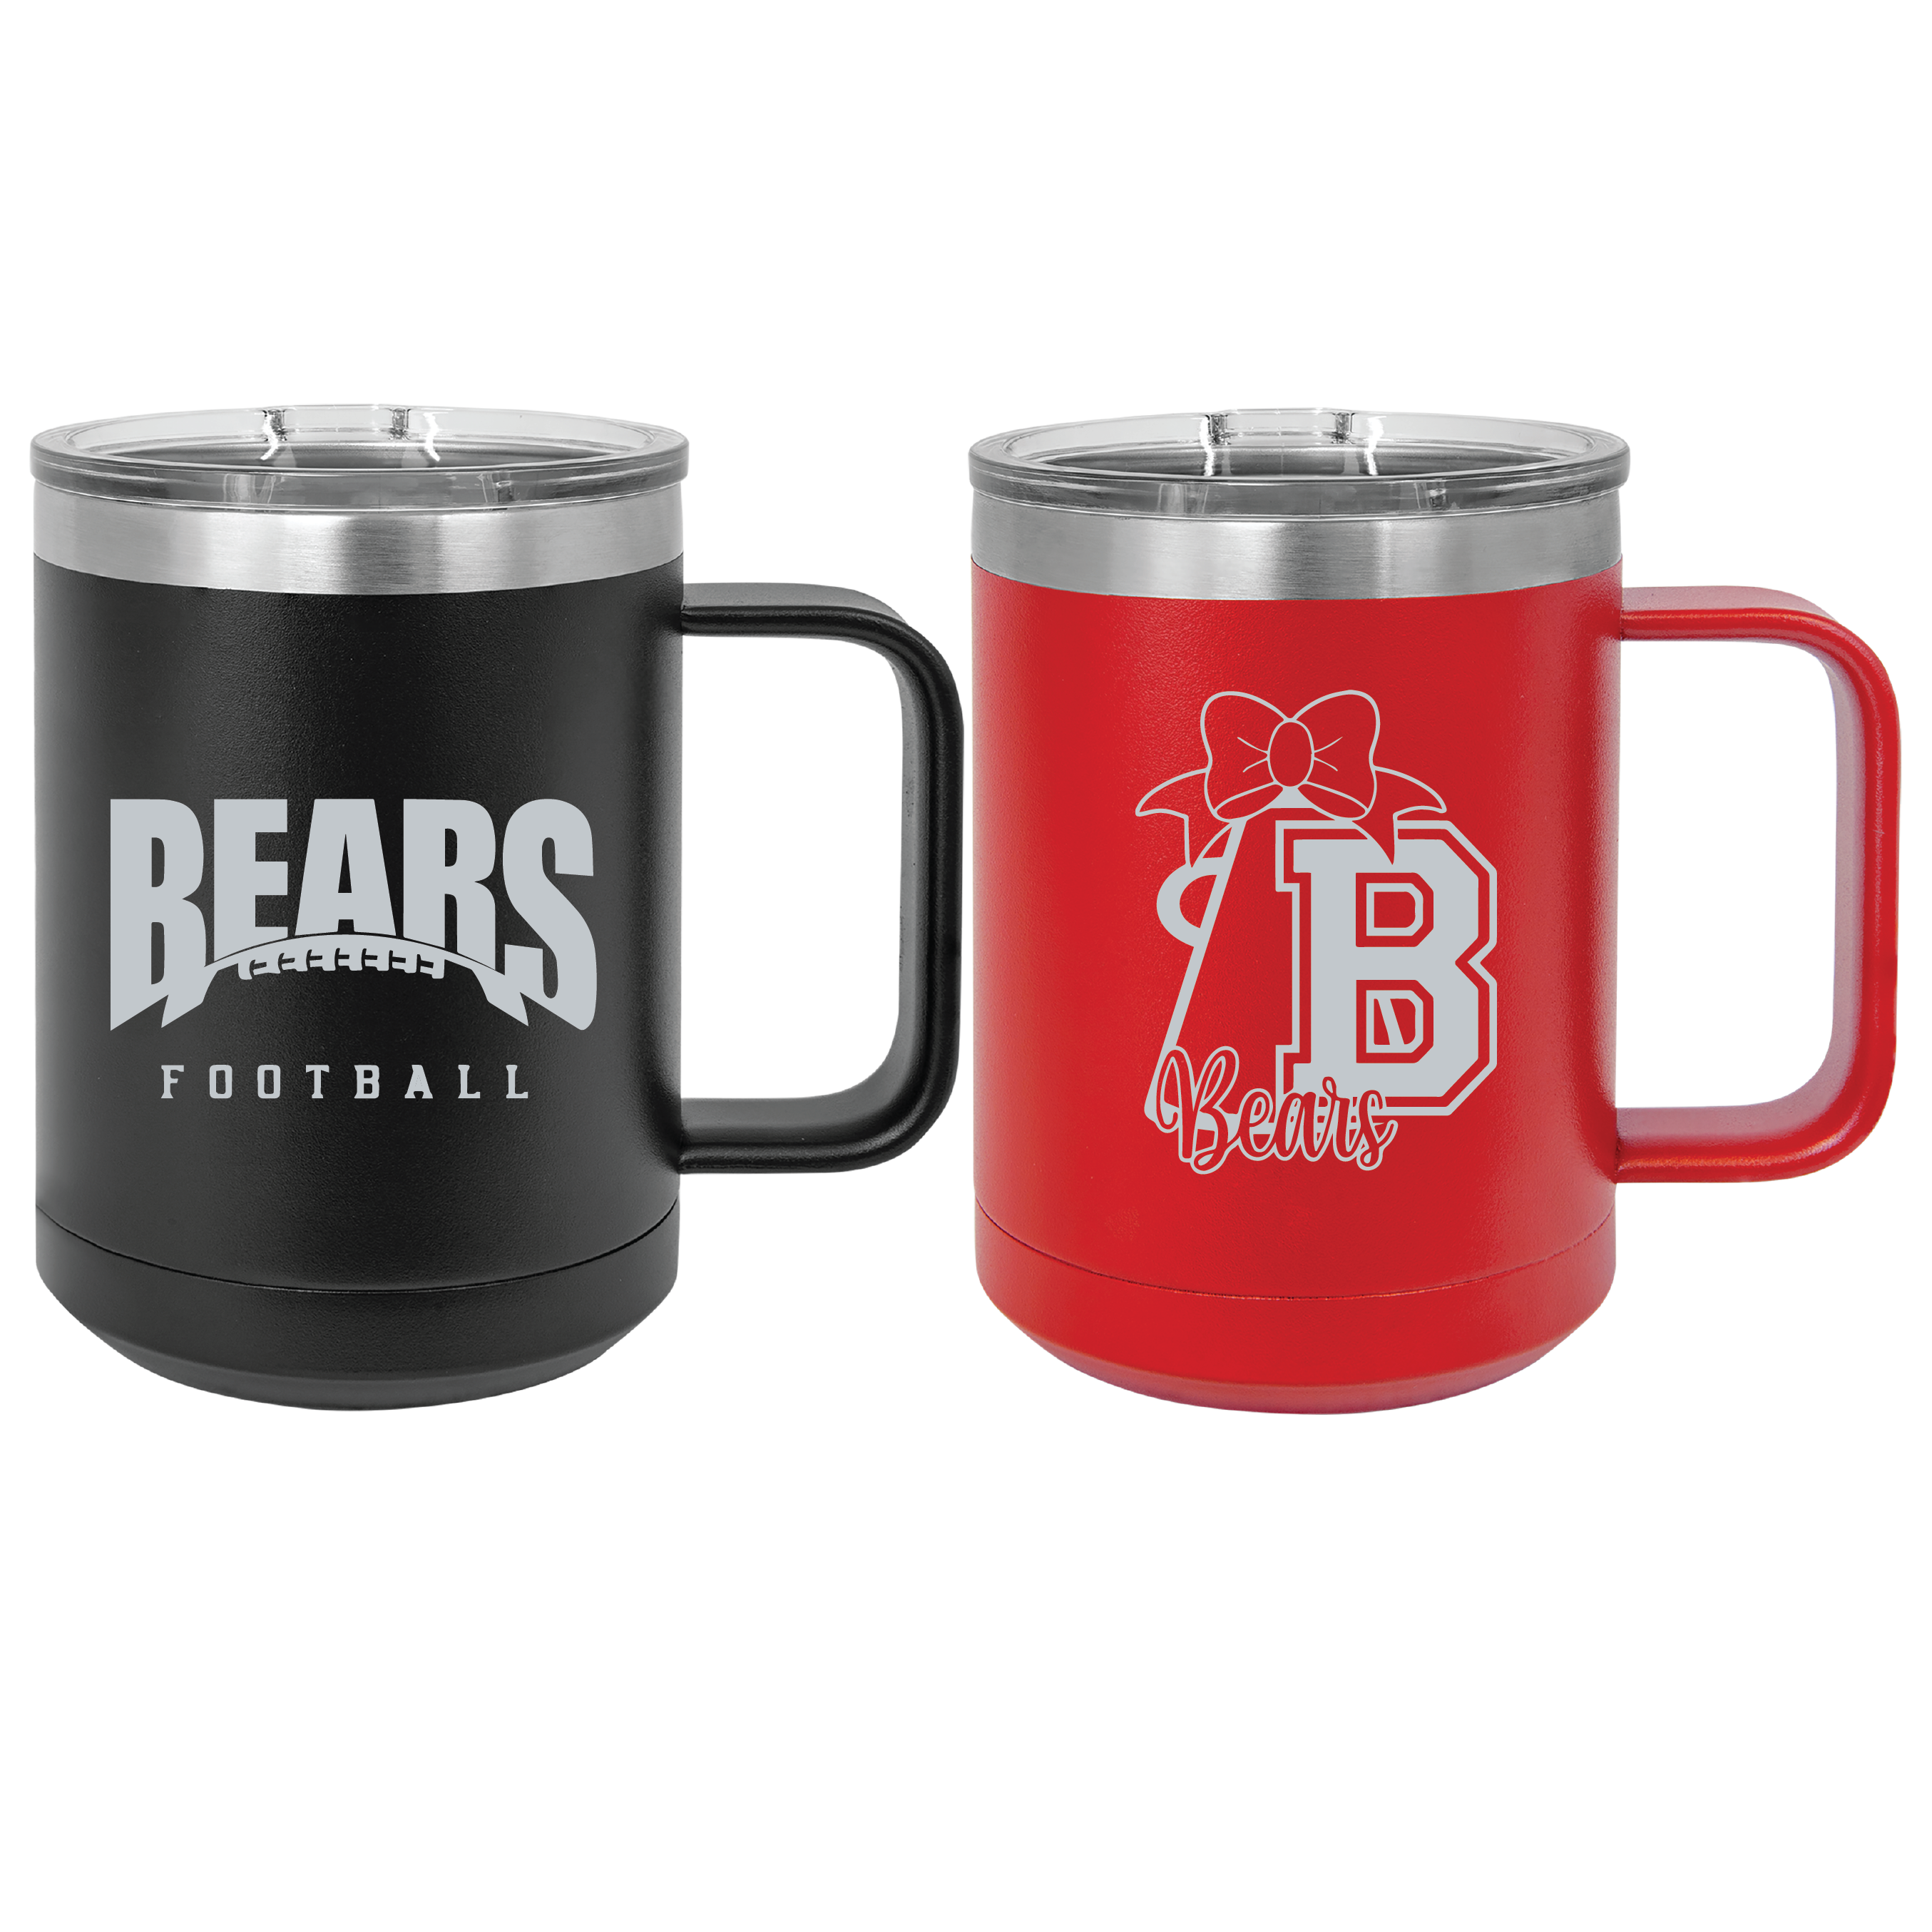 15oz Stainless Steel Laser Engraved Coffee Mugs at Balloons Tomorrow